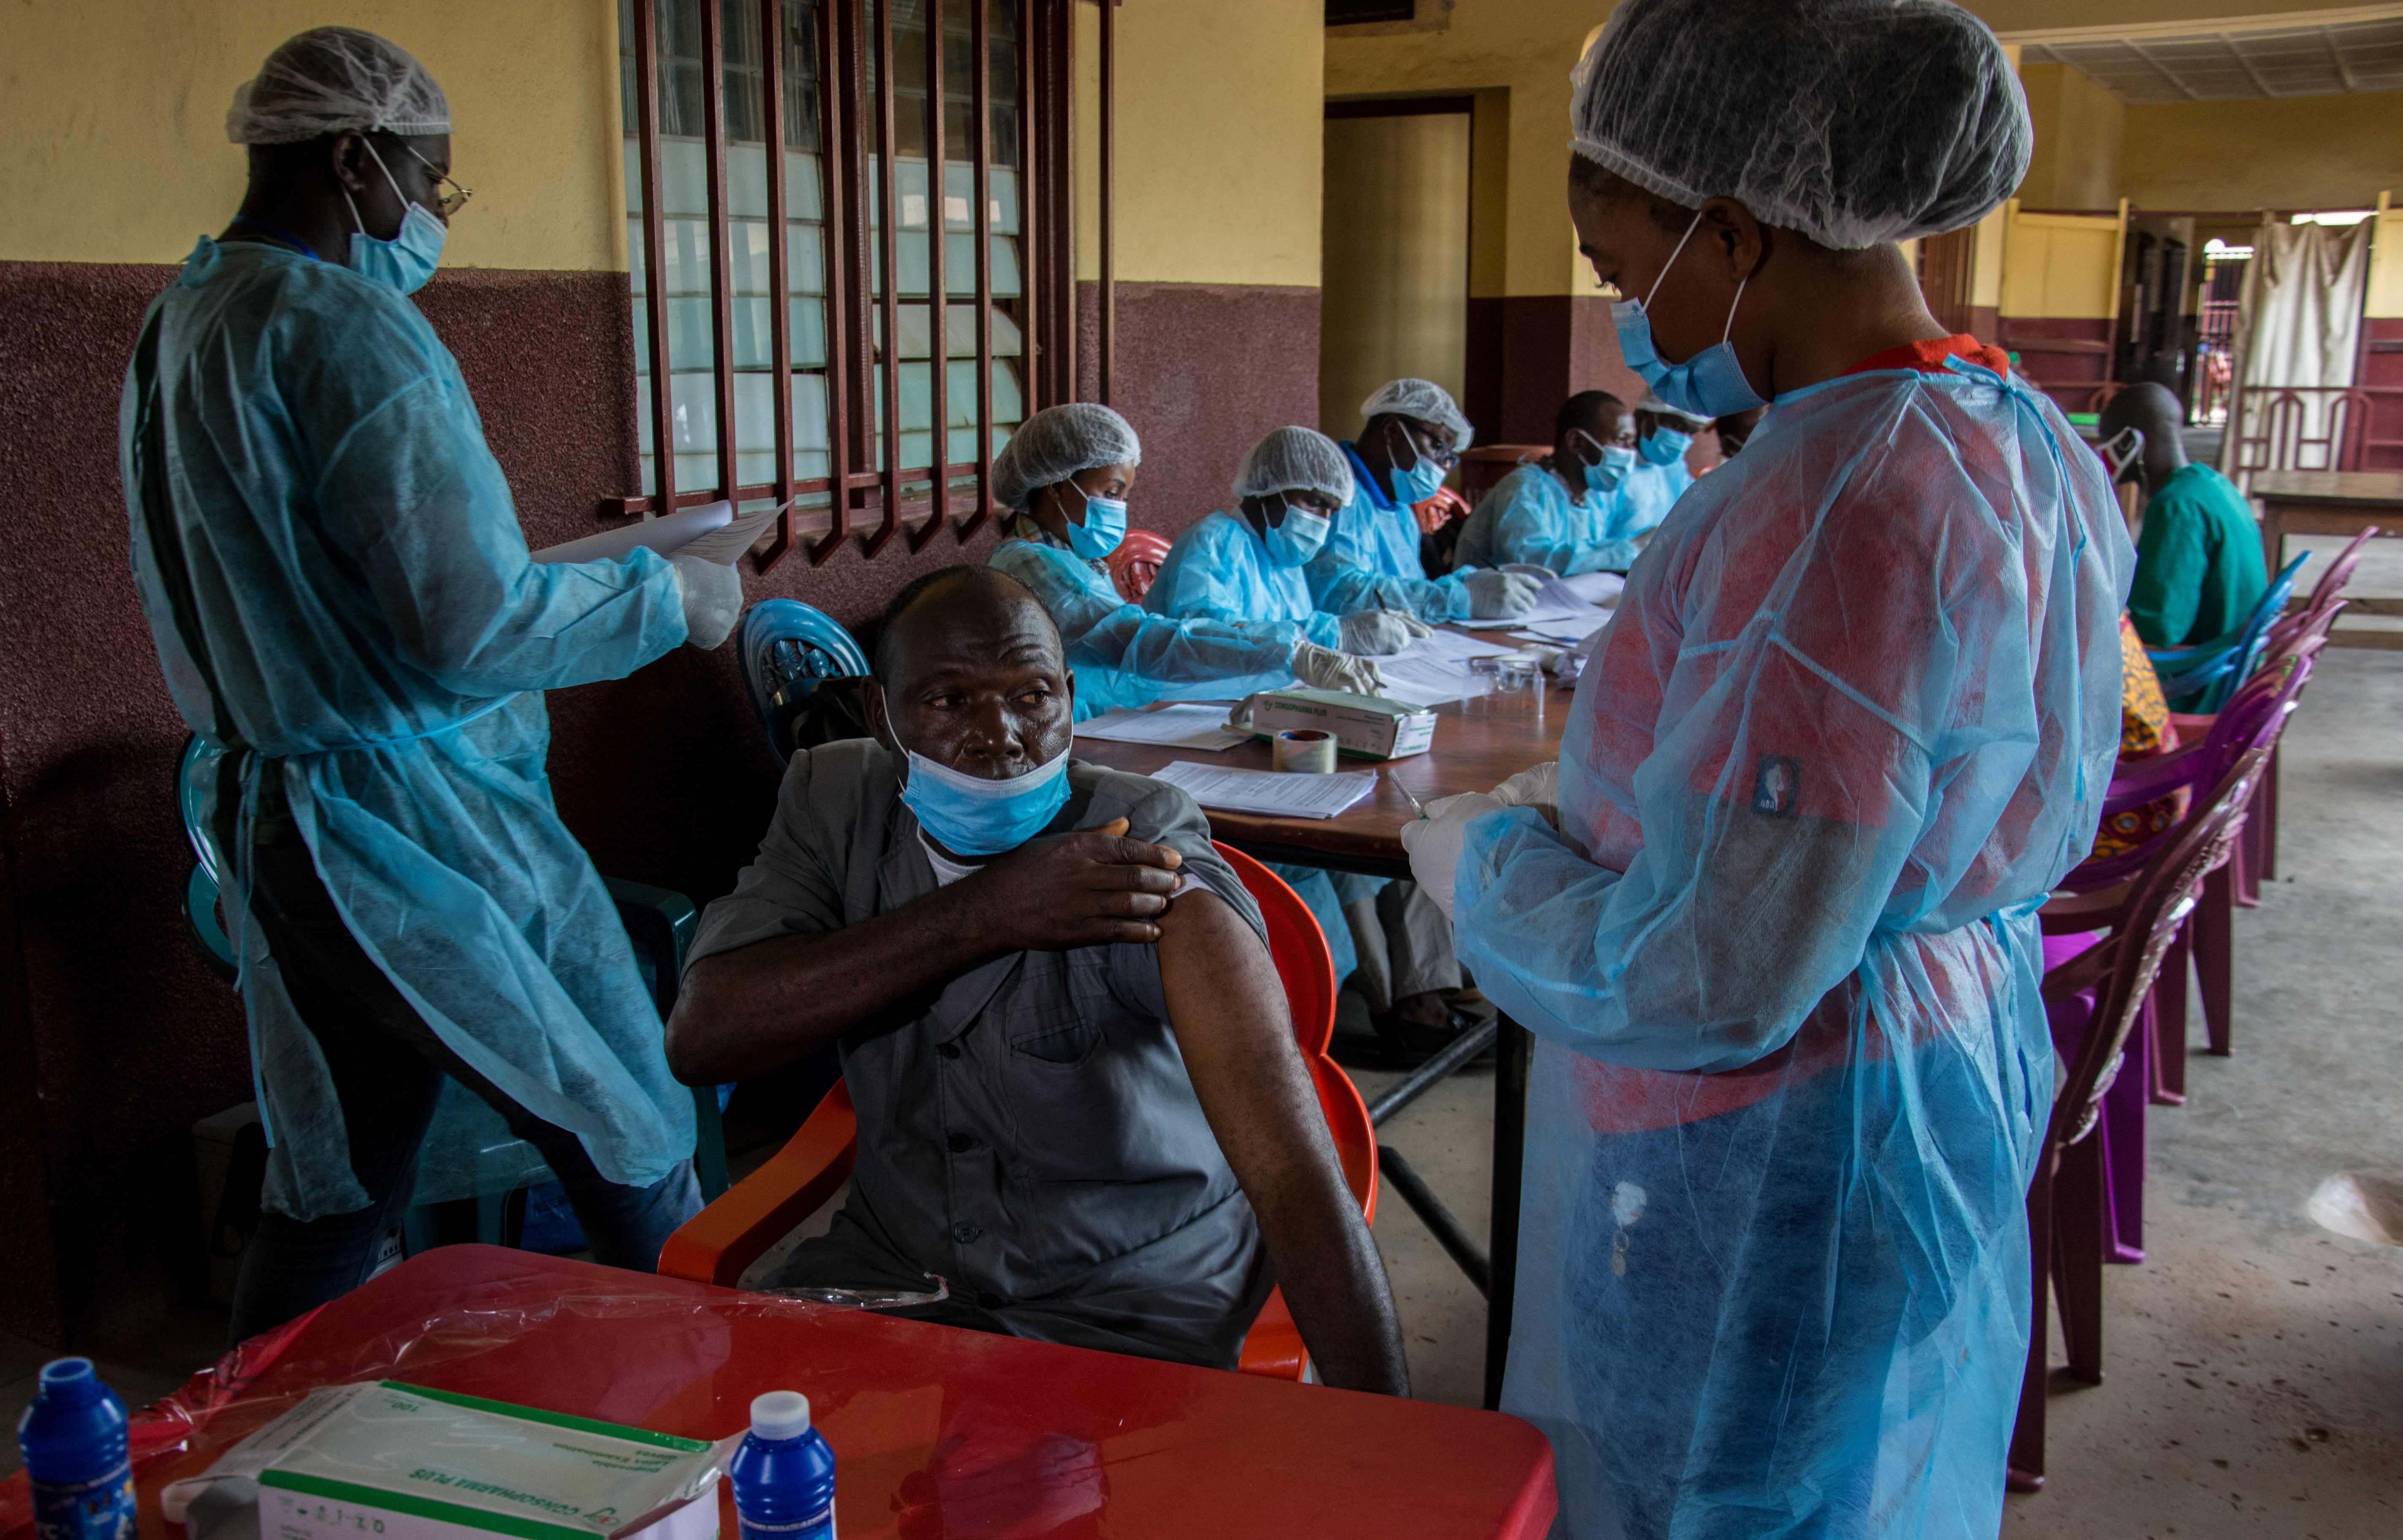 A staff member of the N’zerekore hospital lifts his shirt sleeve as he prepares to get his anti-ebola vaccination in Guinea earlier this year